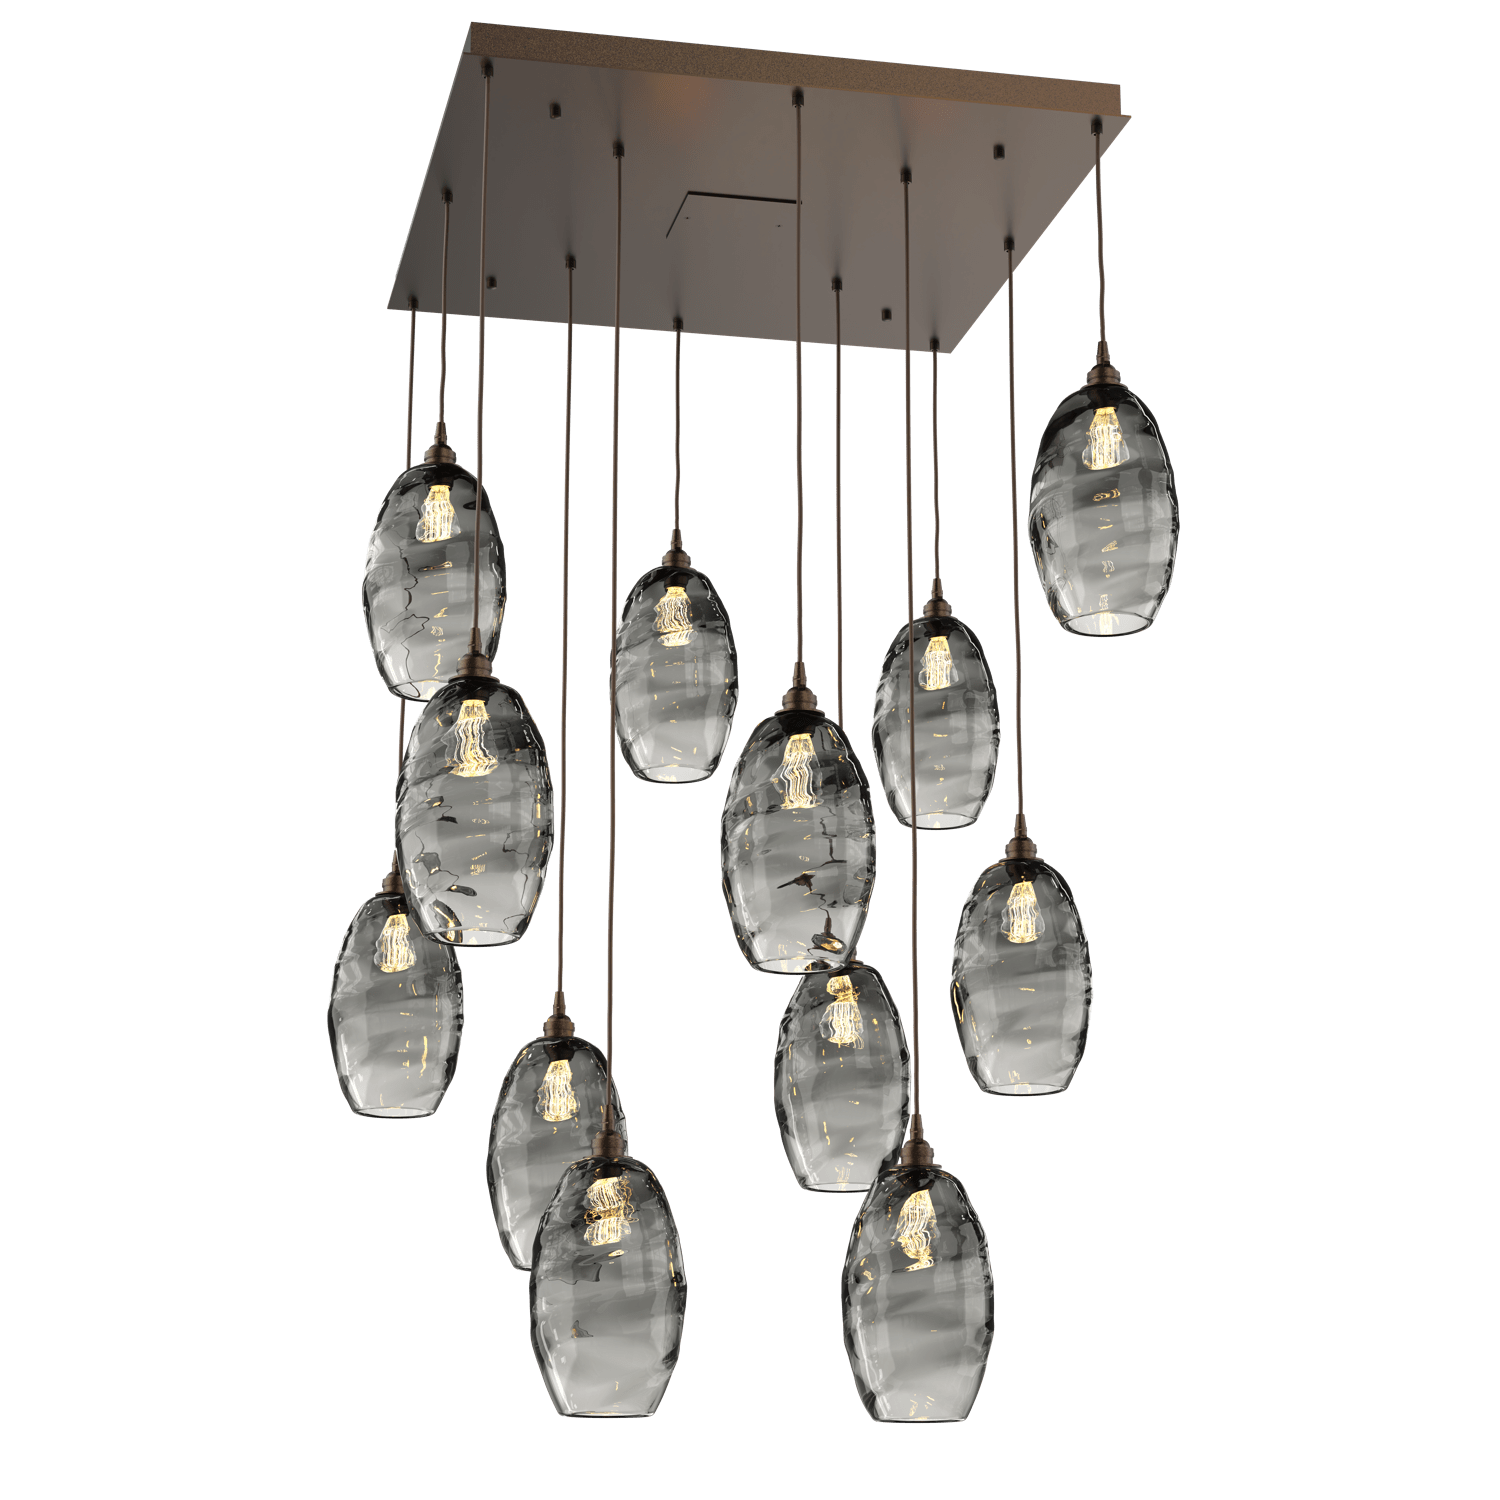 CHB0035-12-FB-OS-Hammerton-Studio-Optic-Blown-Glass-Elisse-12-light-square-pendant-chandelier-with-flat-bronze-finish-and-optic-smoke-blown-glass-shades-and-incandescent-lamping